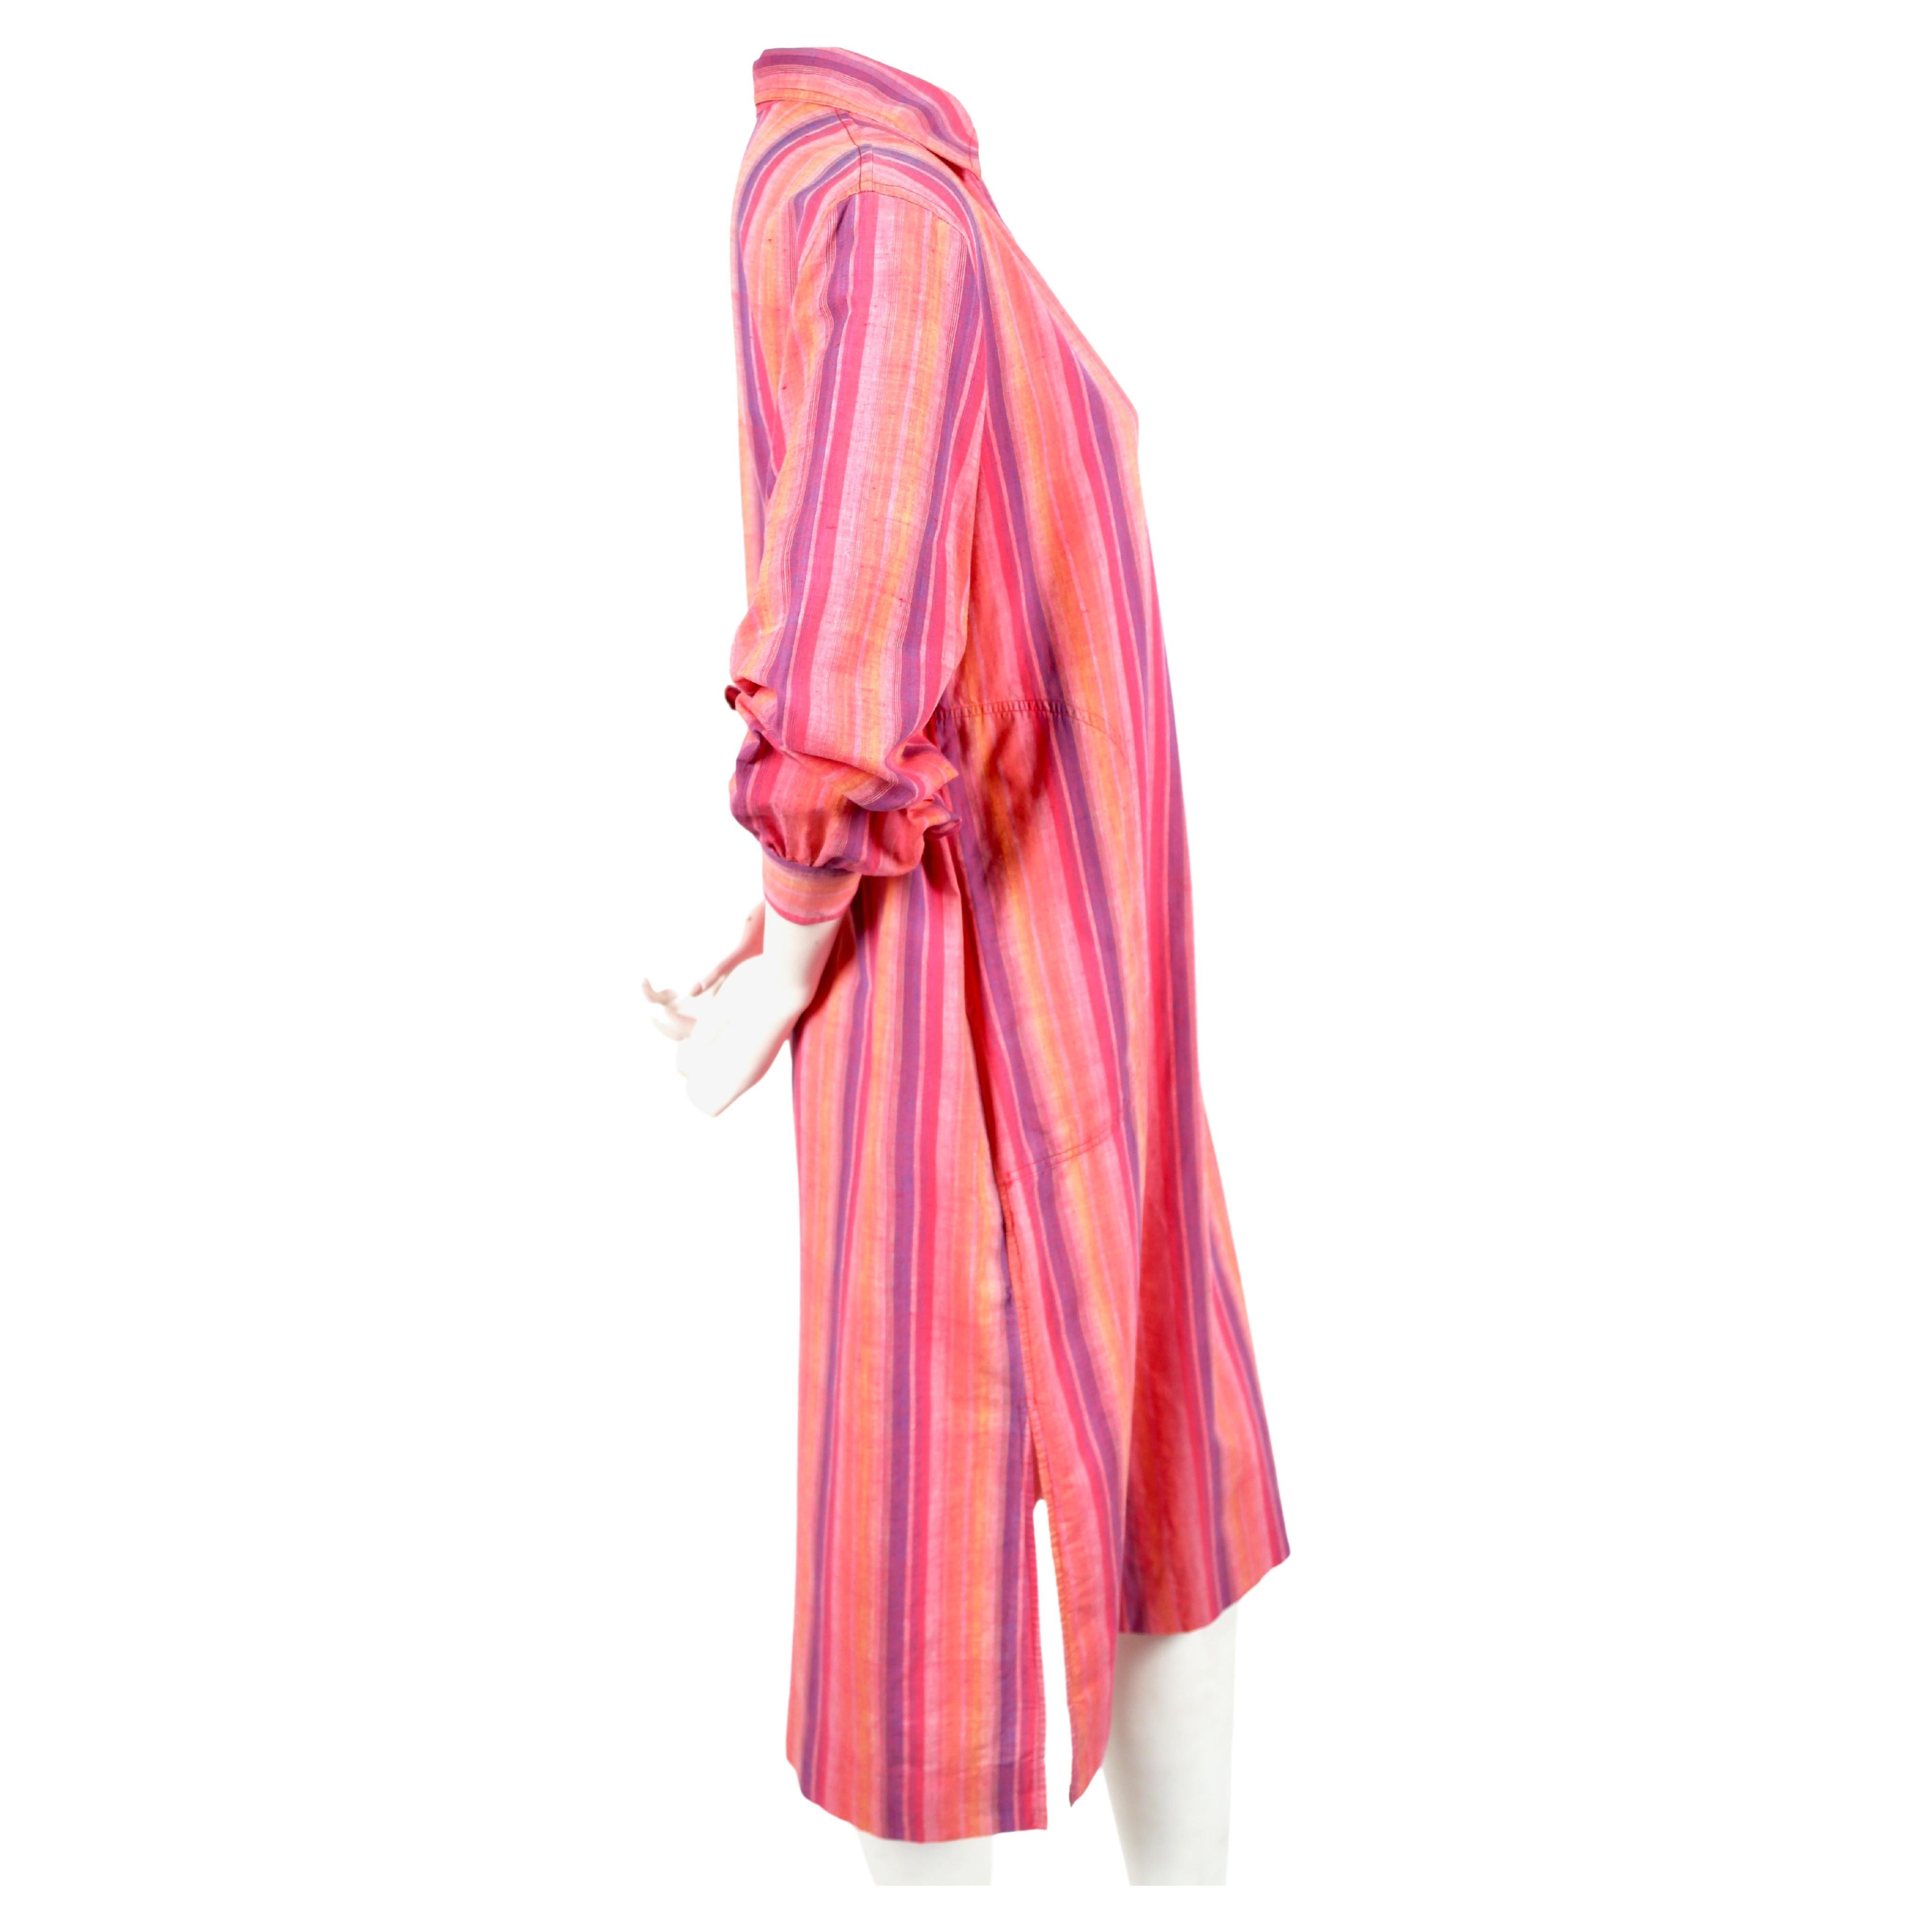 Brightly-colored, fuchsia, orange and purple striped cotton dress designed by Yves Saint Laurent dating to the 1970's. French size 40. Approximate measurements: shoulders 16.75